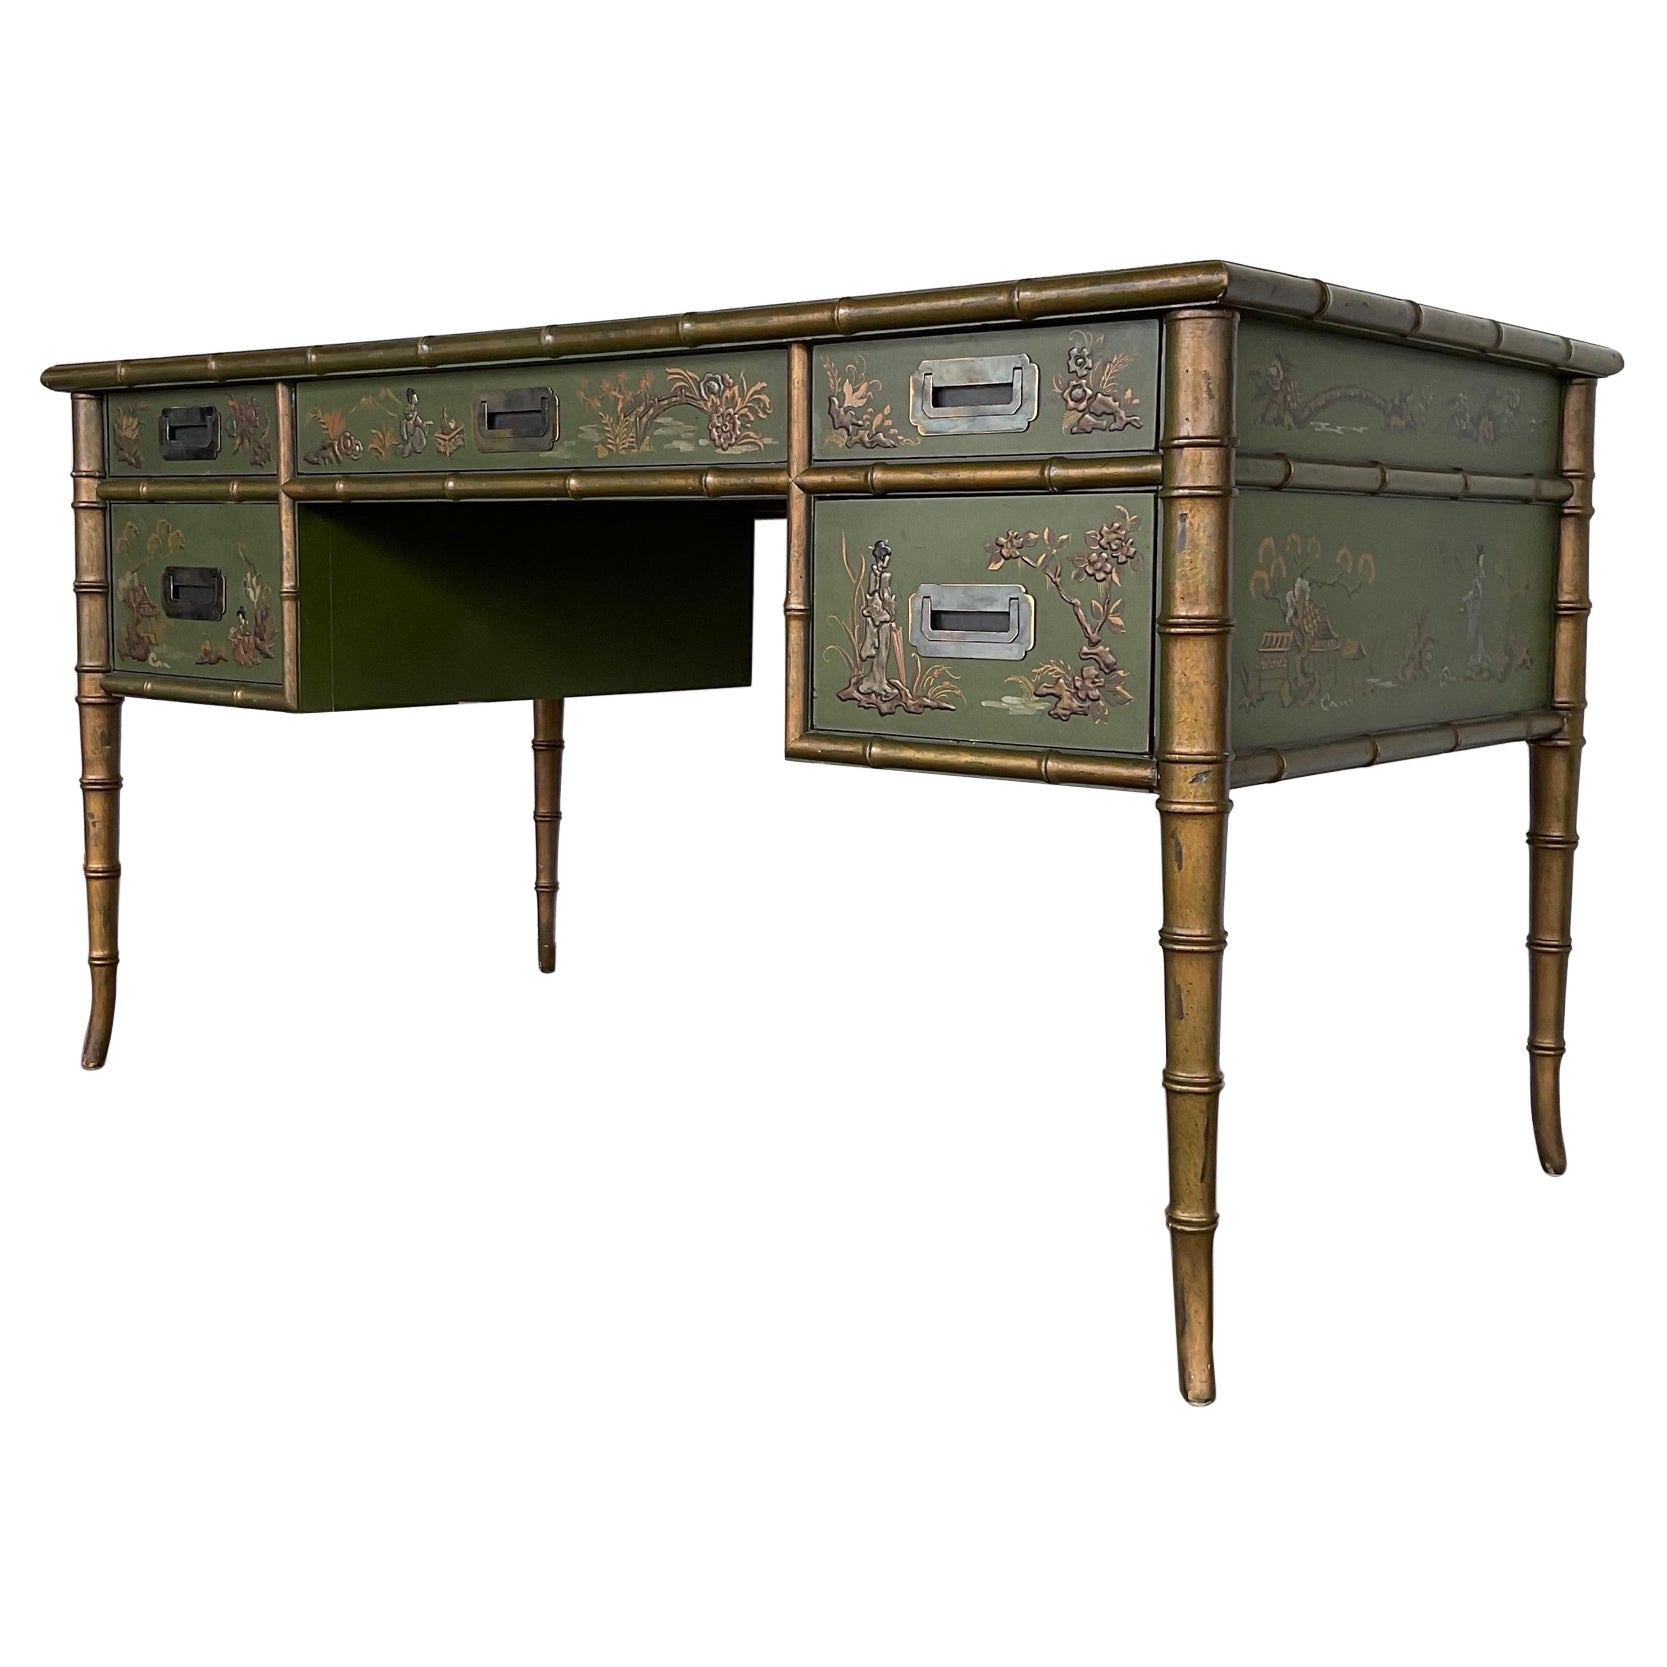 1960s Chinoiserie Desk from Drexel Heritage 